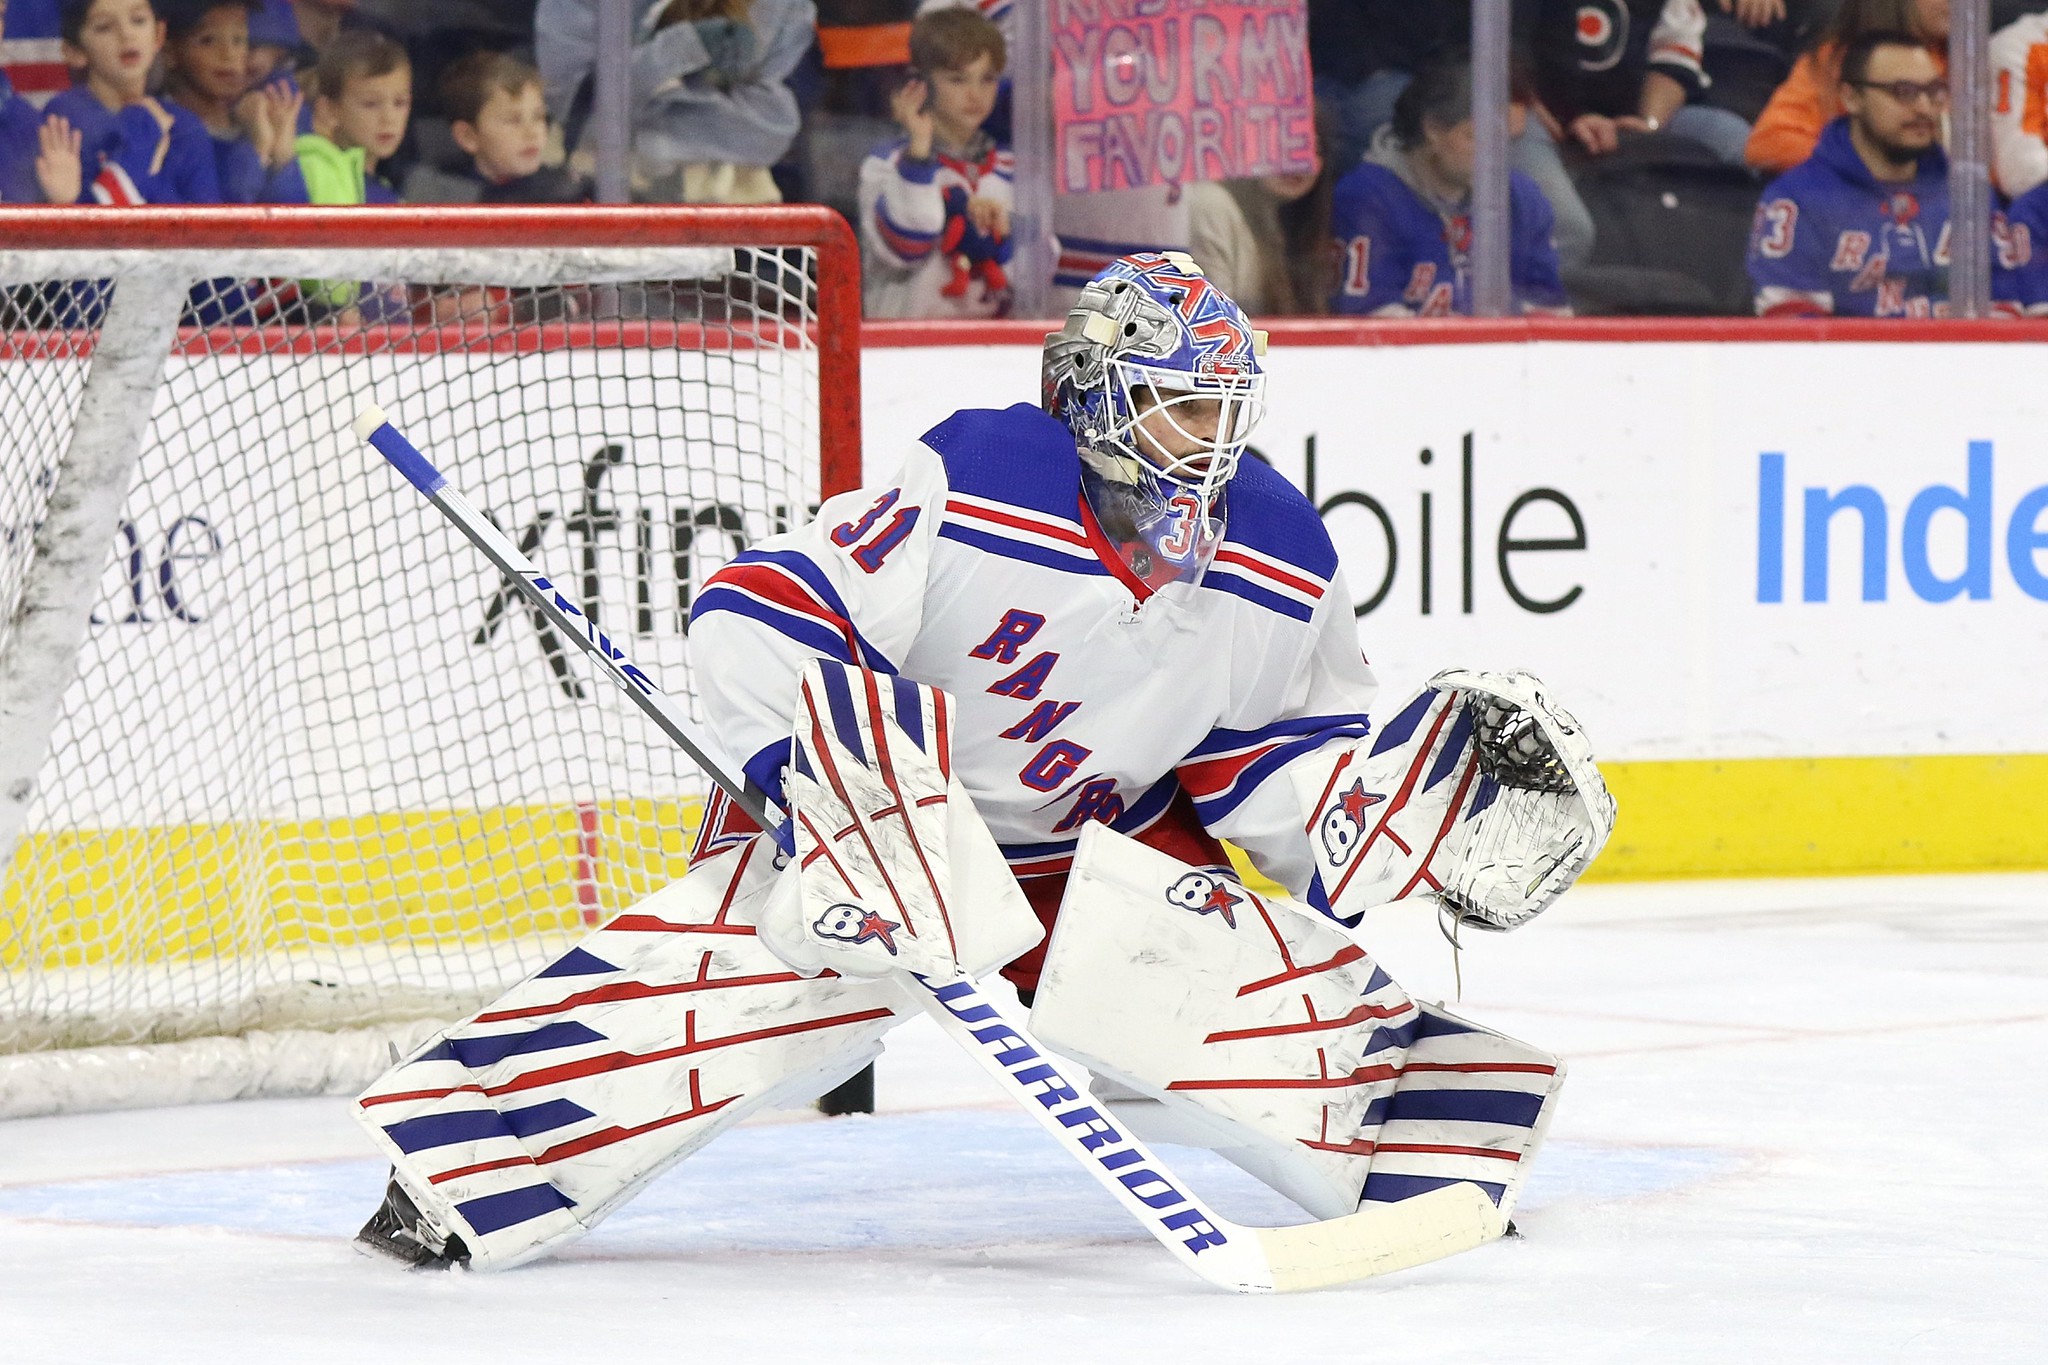 4 Reasons Why the New York Rangers Will Win the Stanley Cup